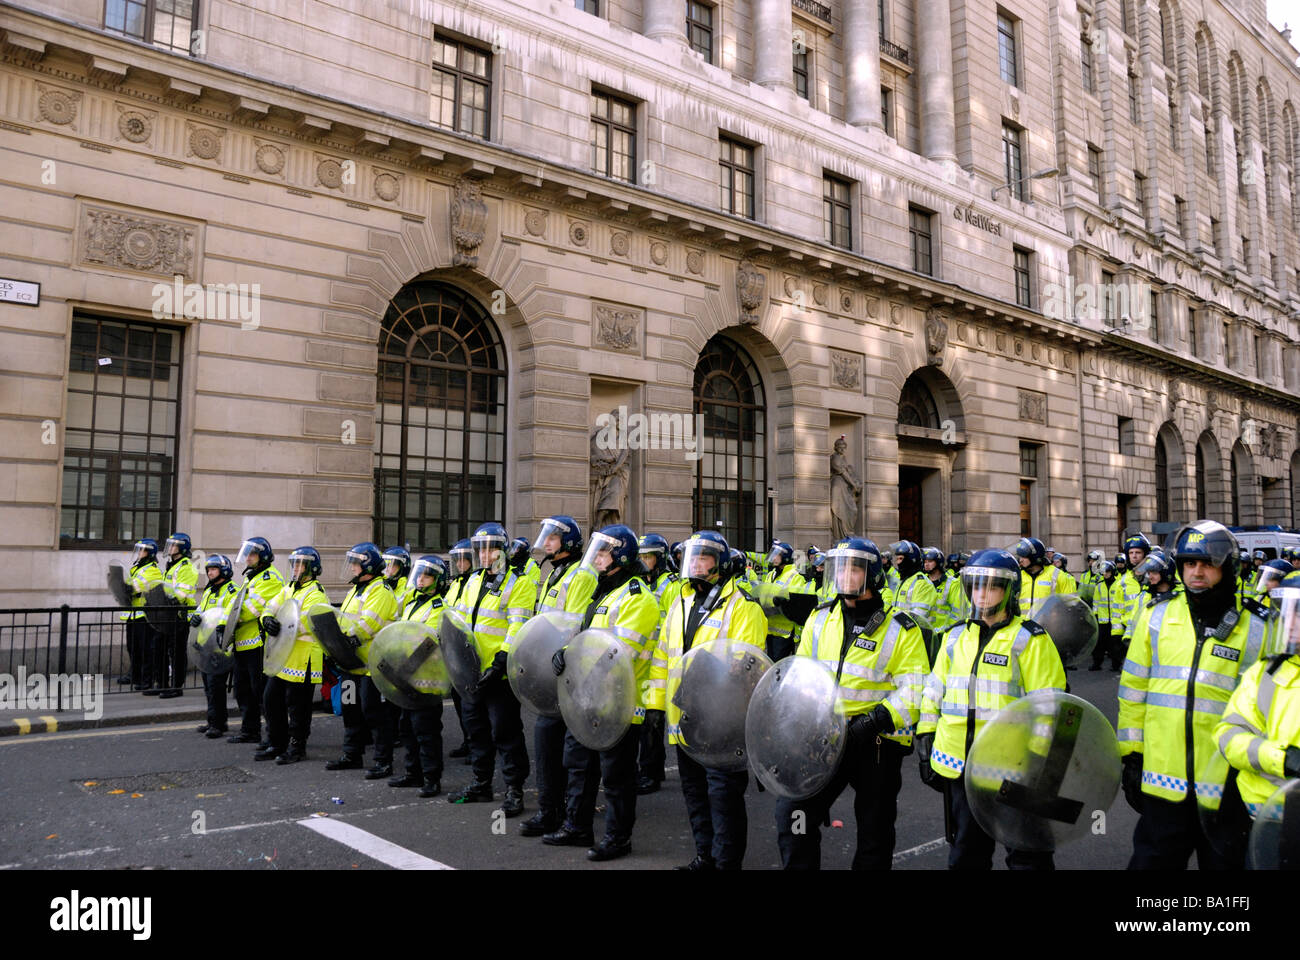 Riot police barricading a street during the G20 protests in the City of London Stock Photo